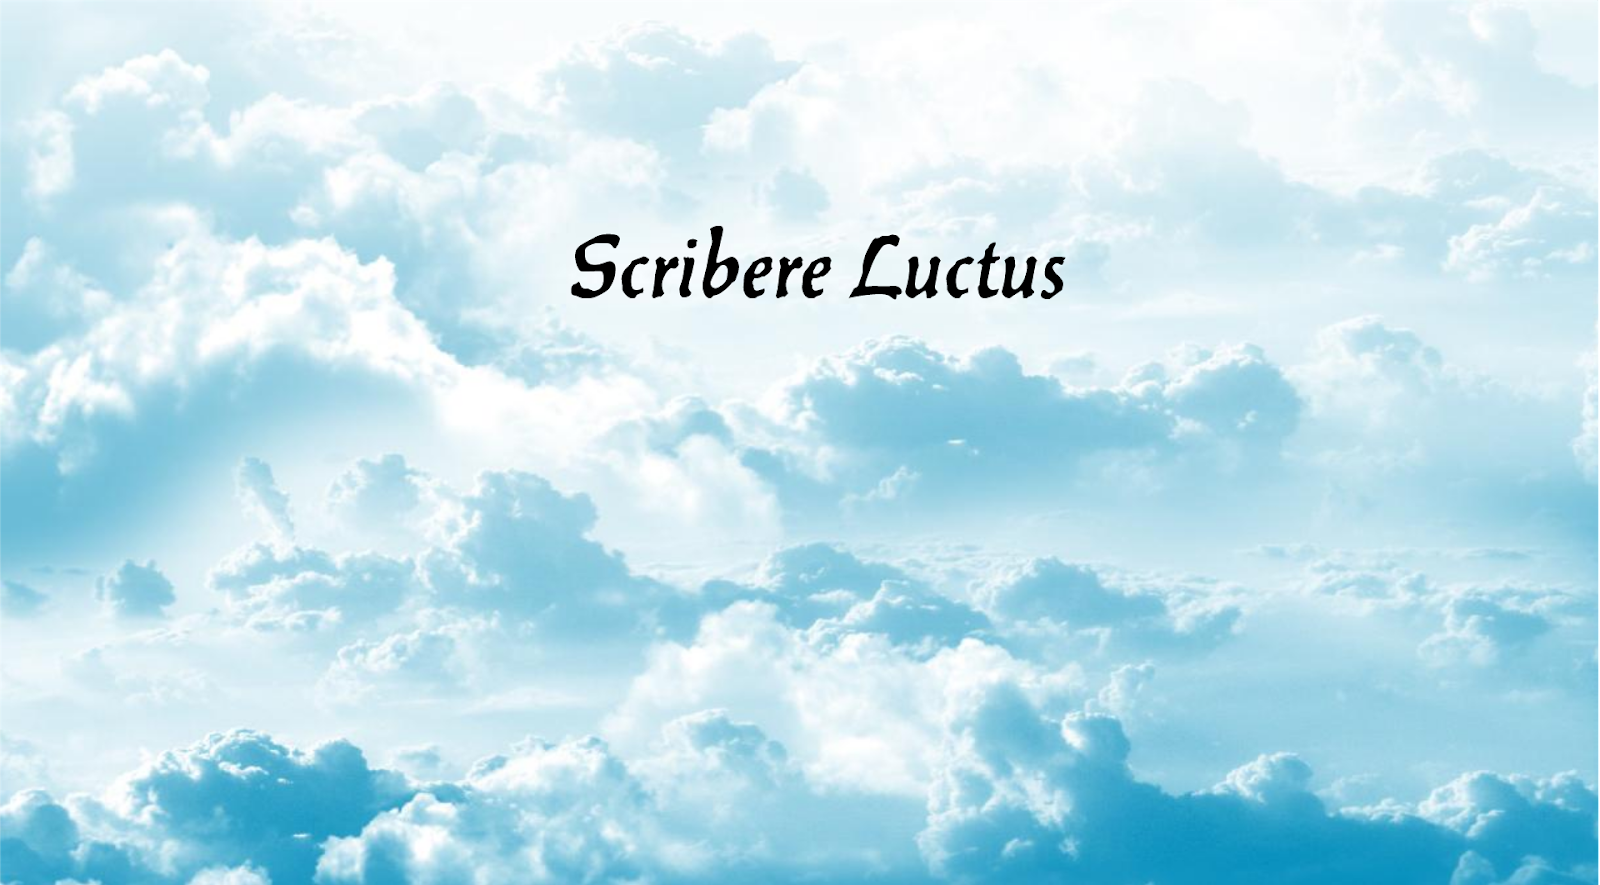 Scribere Luctus